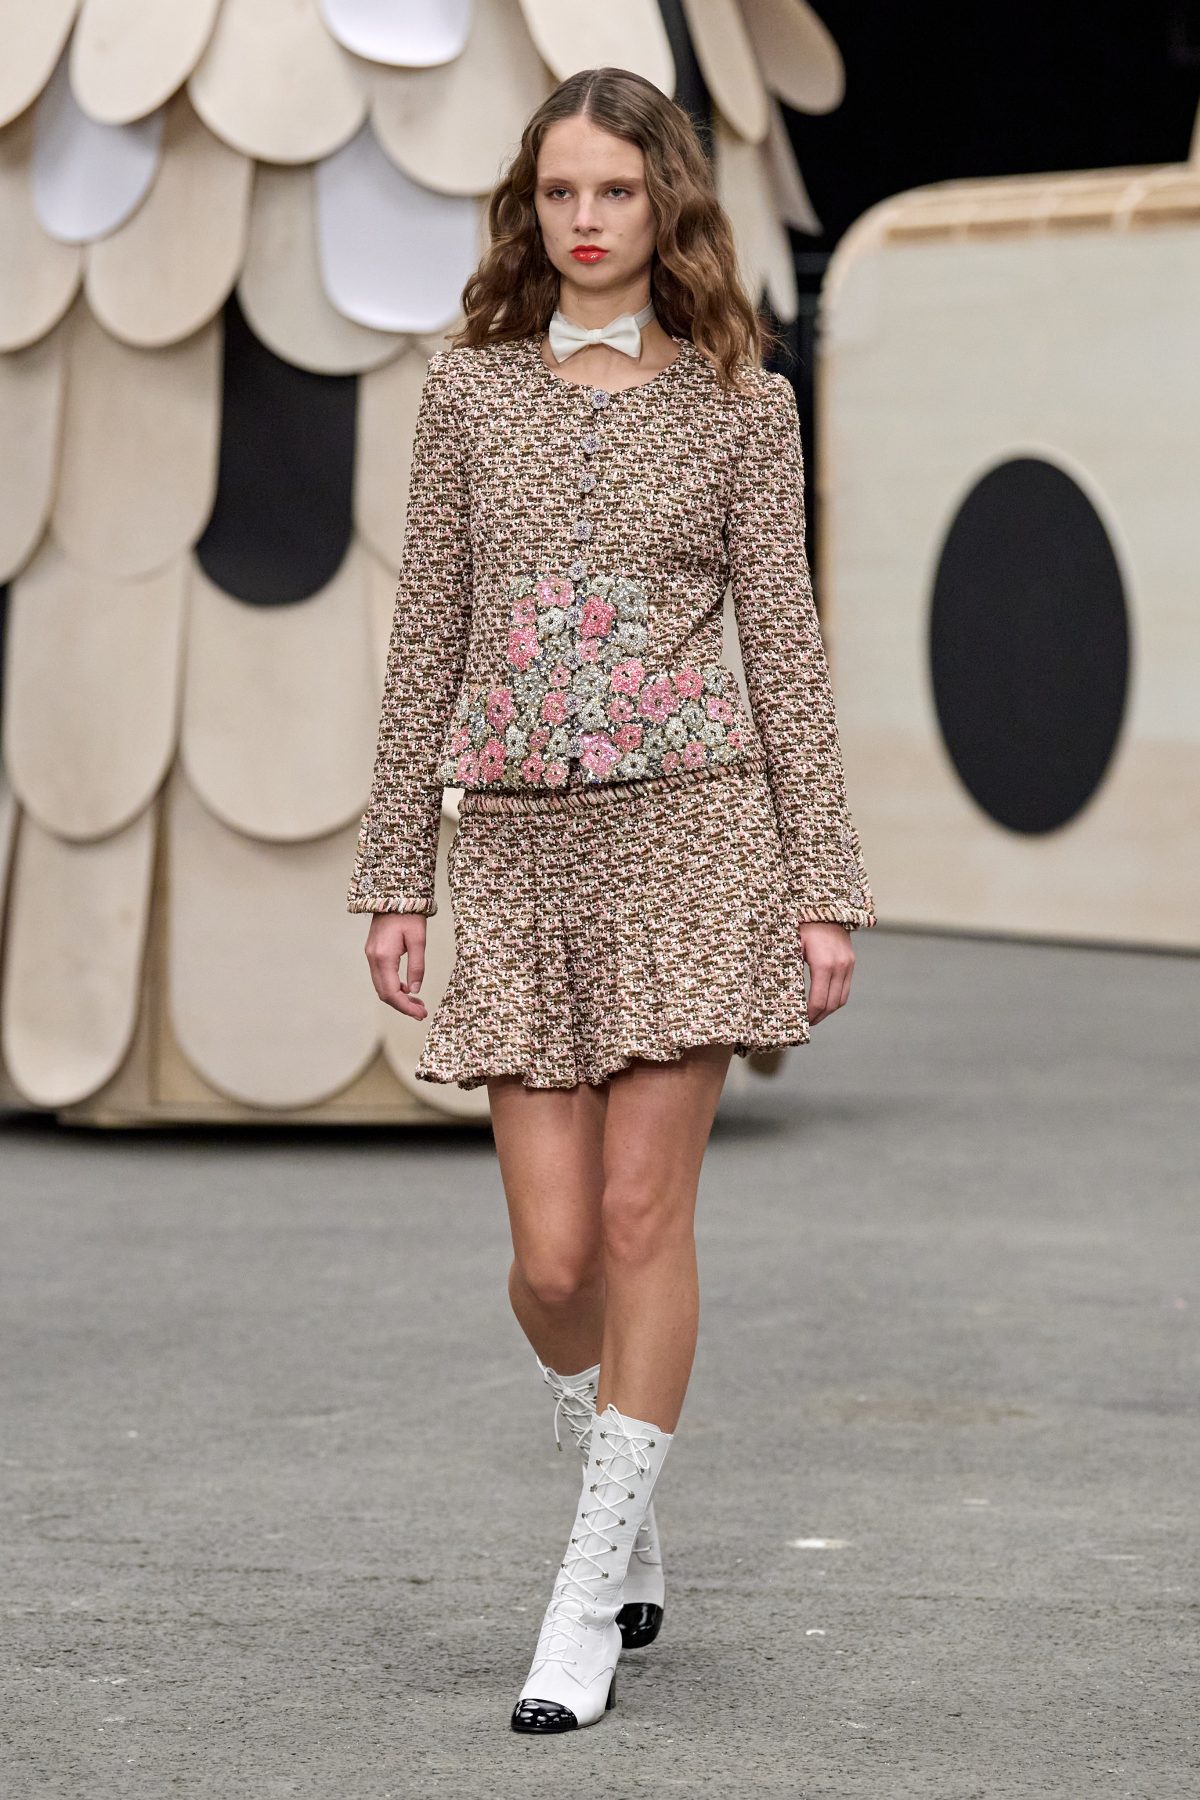 Chanel's SS23 Couture Show Brings A Touch Of Whimsy